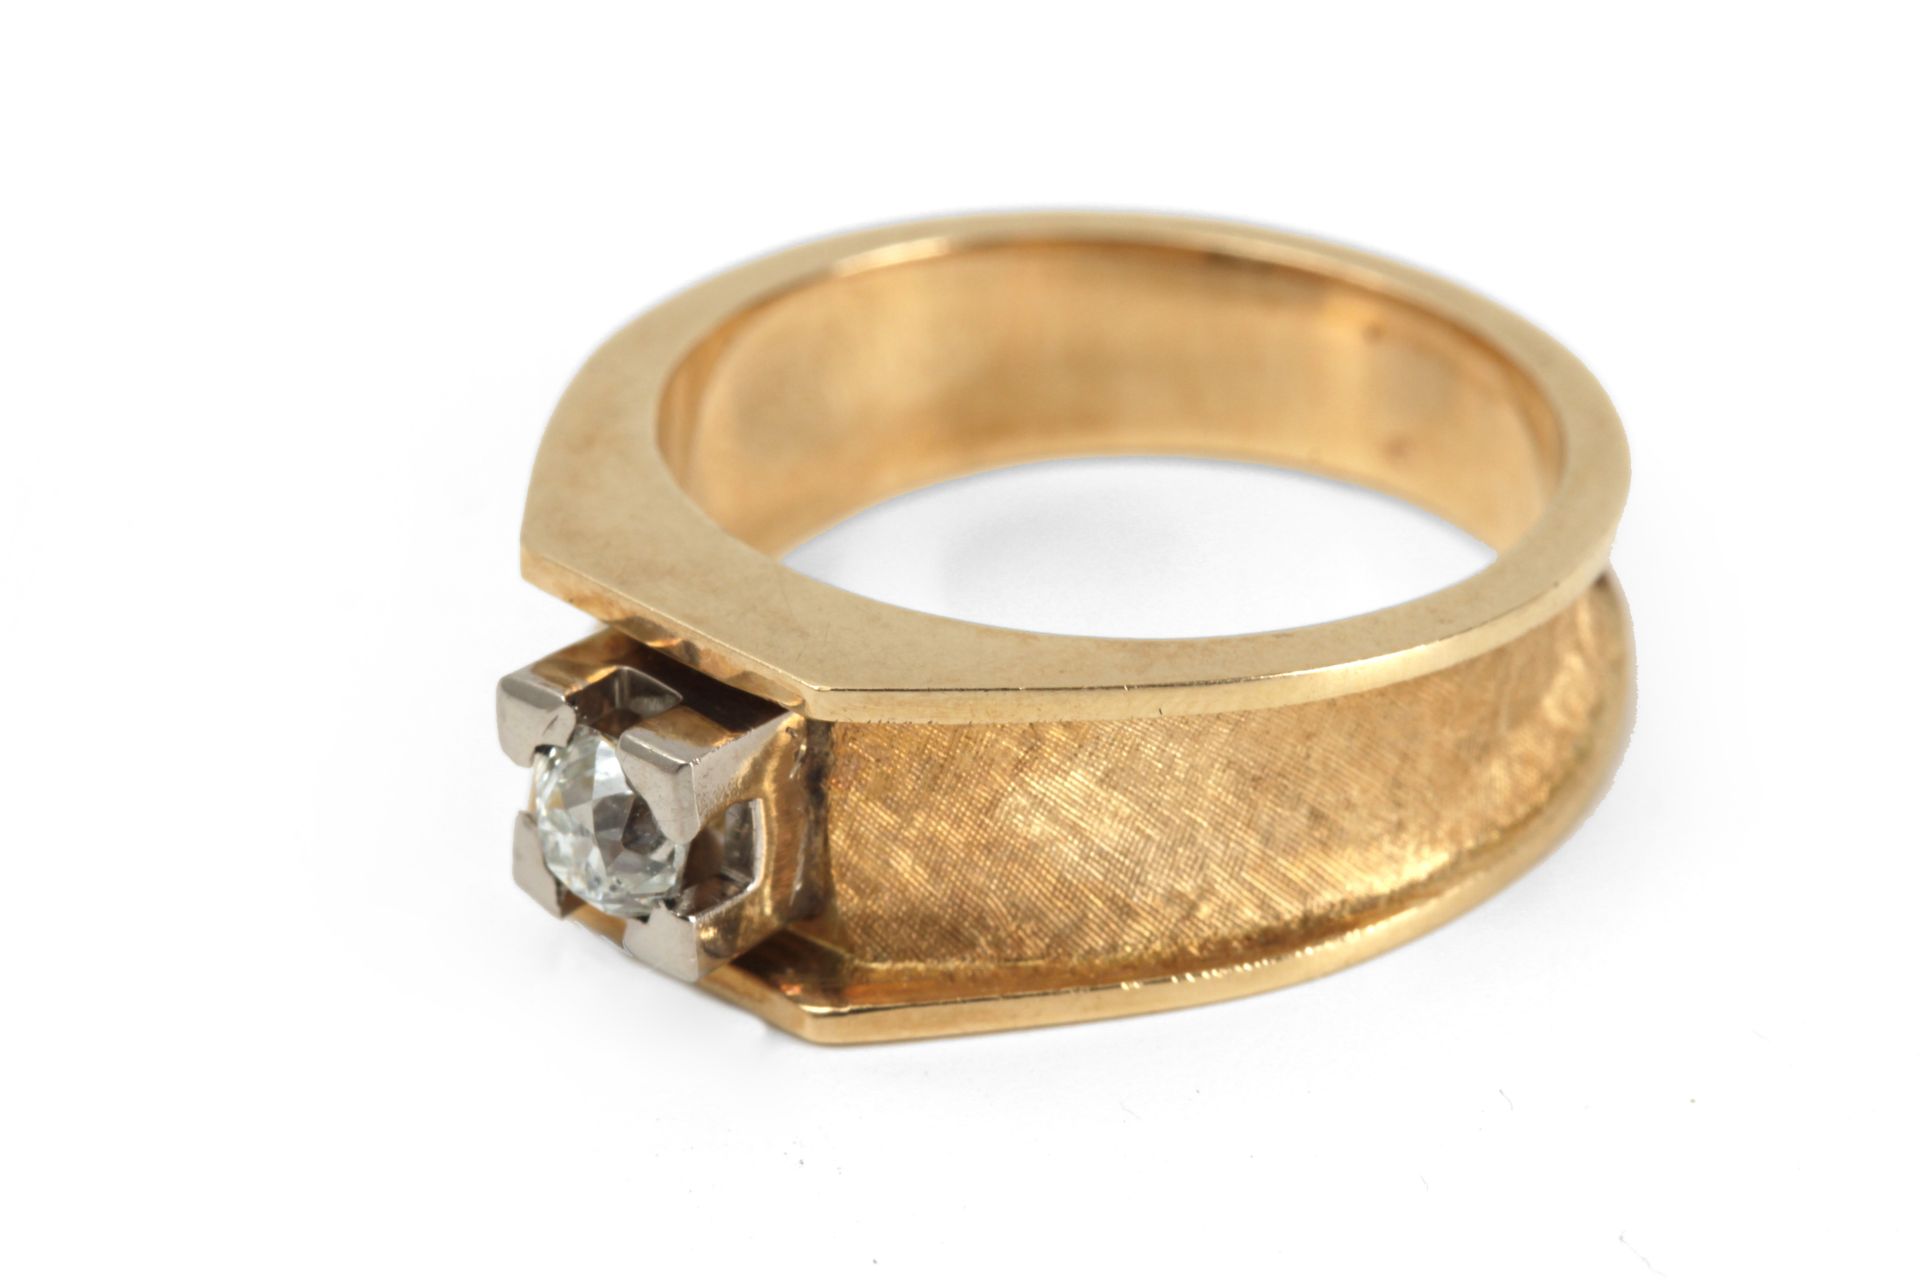 A 0,38 ct. old European cut diamond solitaire ring with an 18k. yellow gold and platinum setting